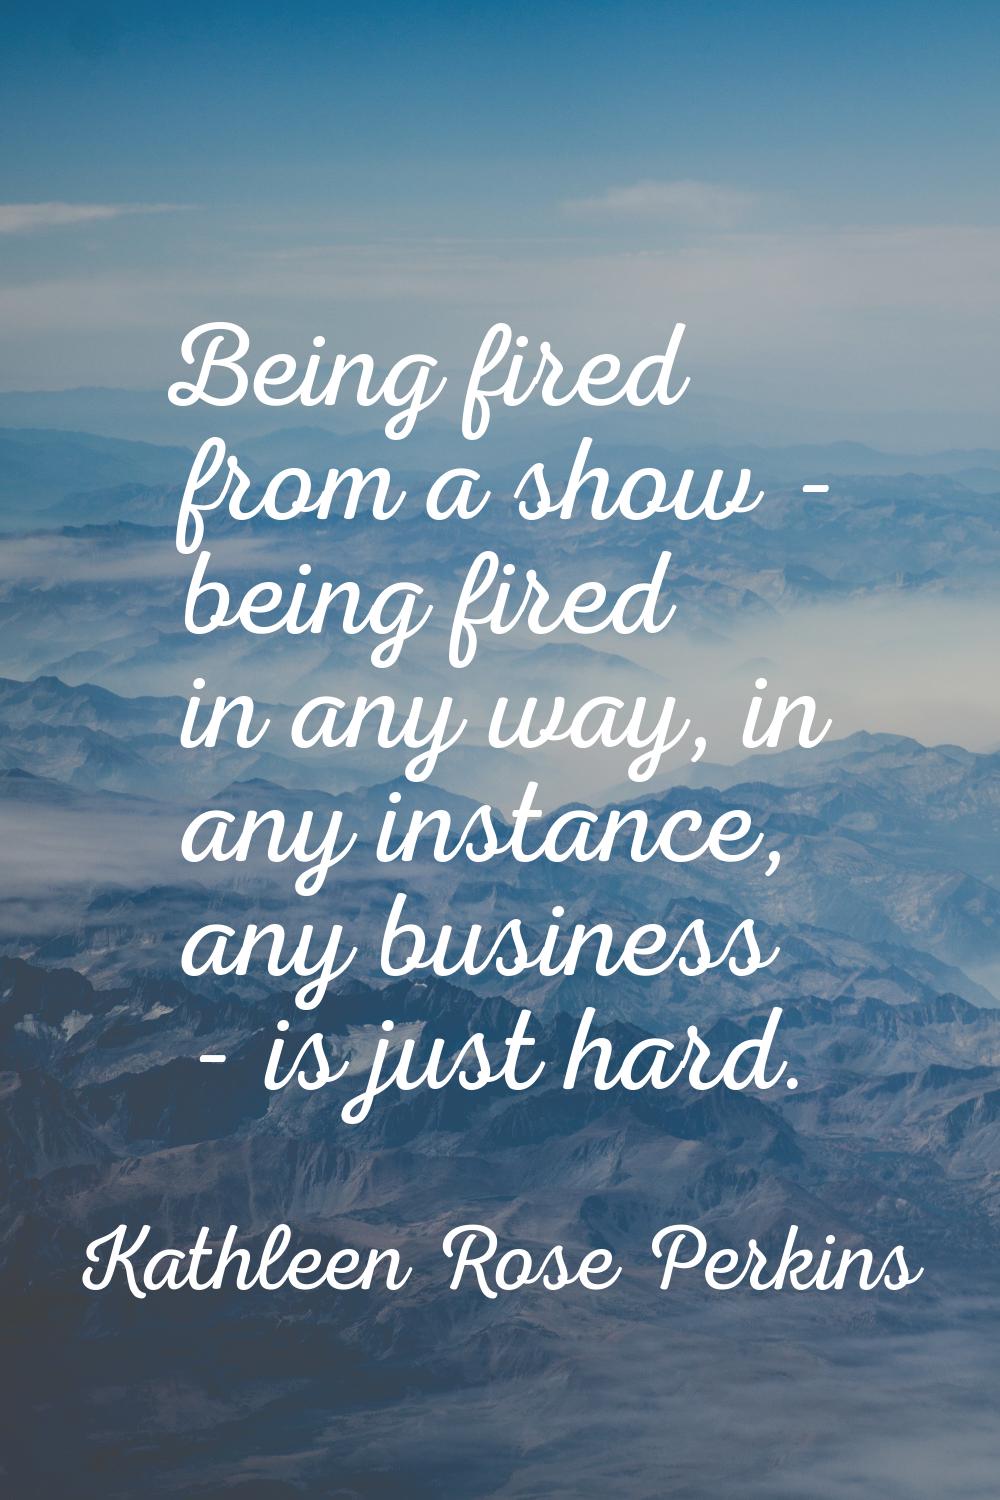 Being fired from a show - being fired in any way, in any instance, any business - is just hard.